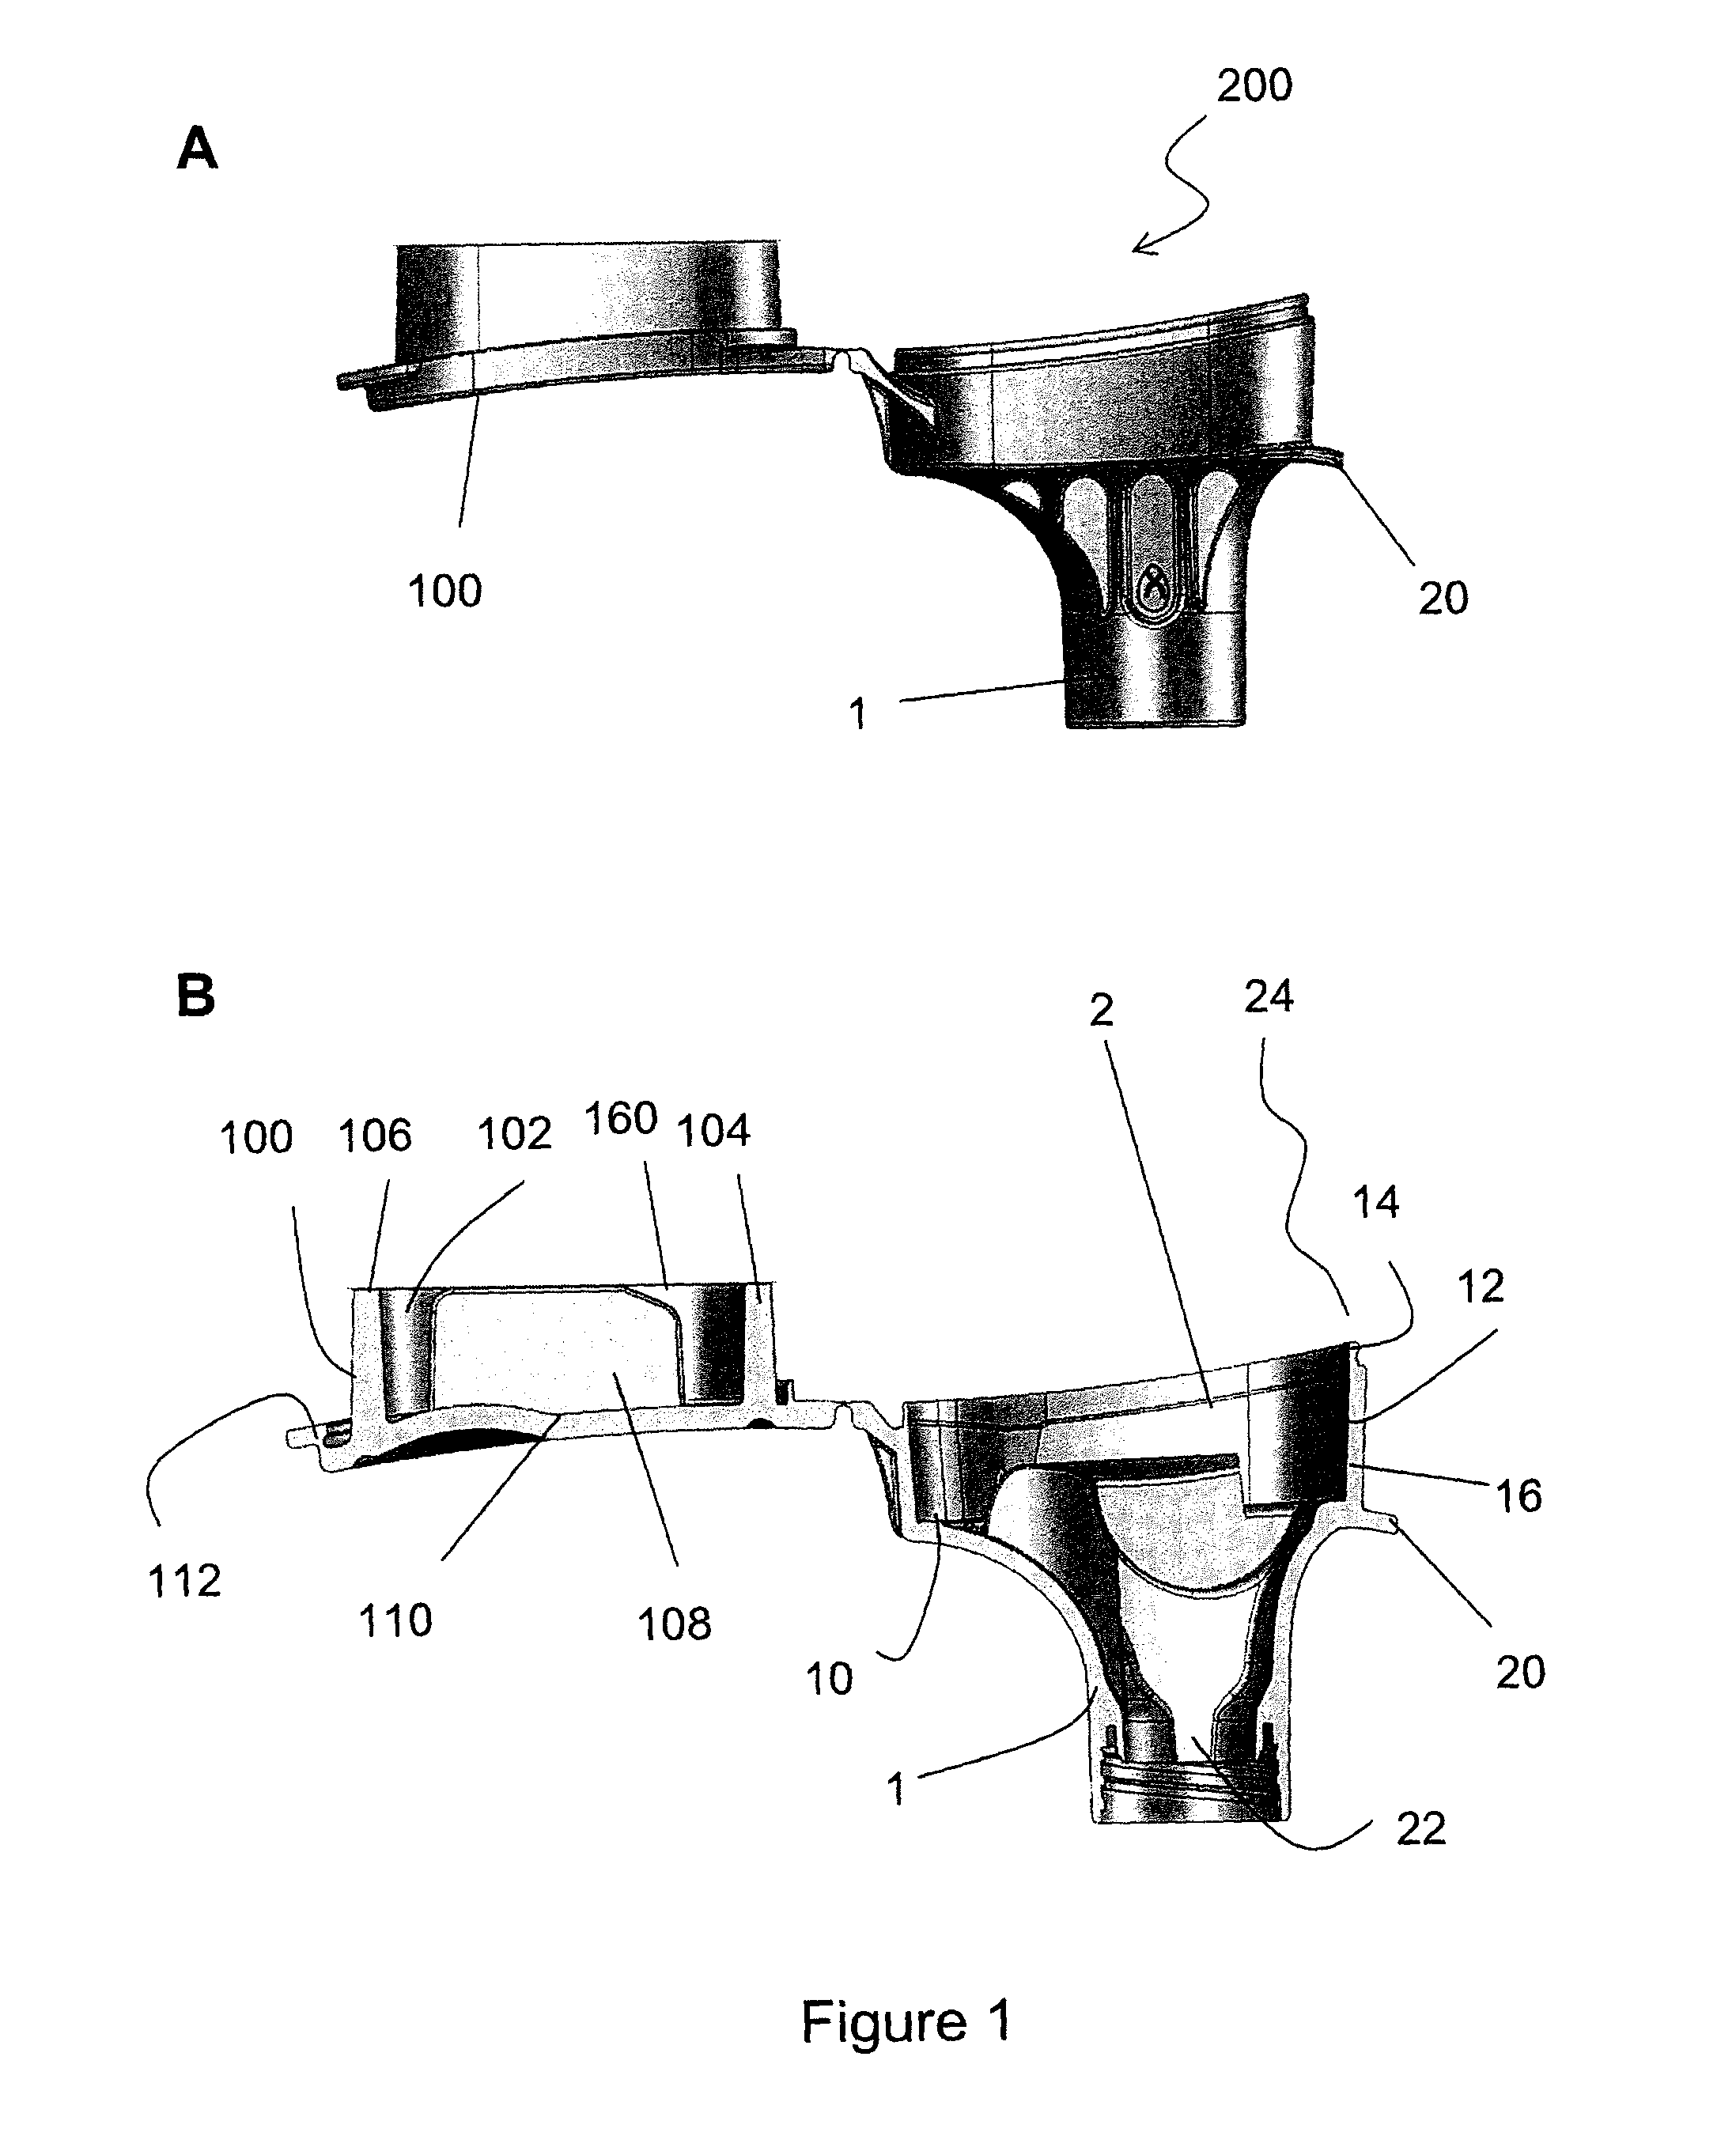 Sample receiving device